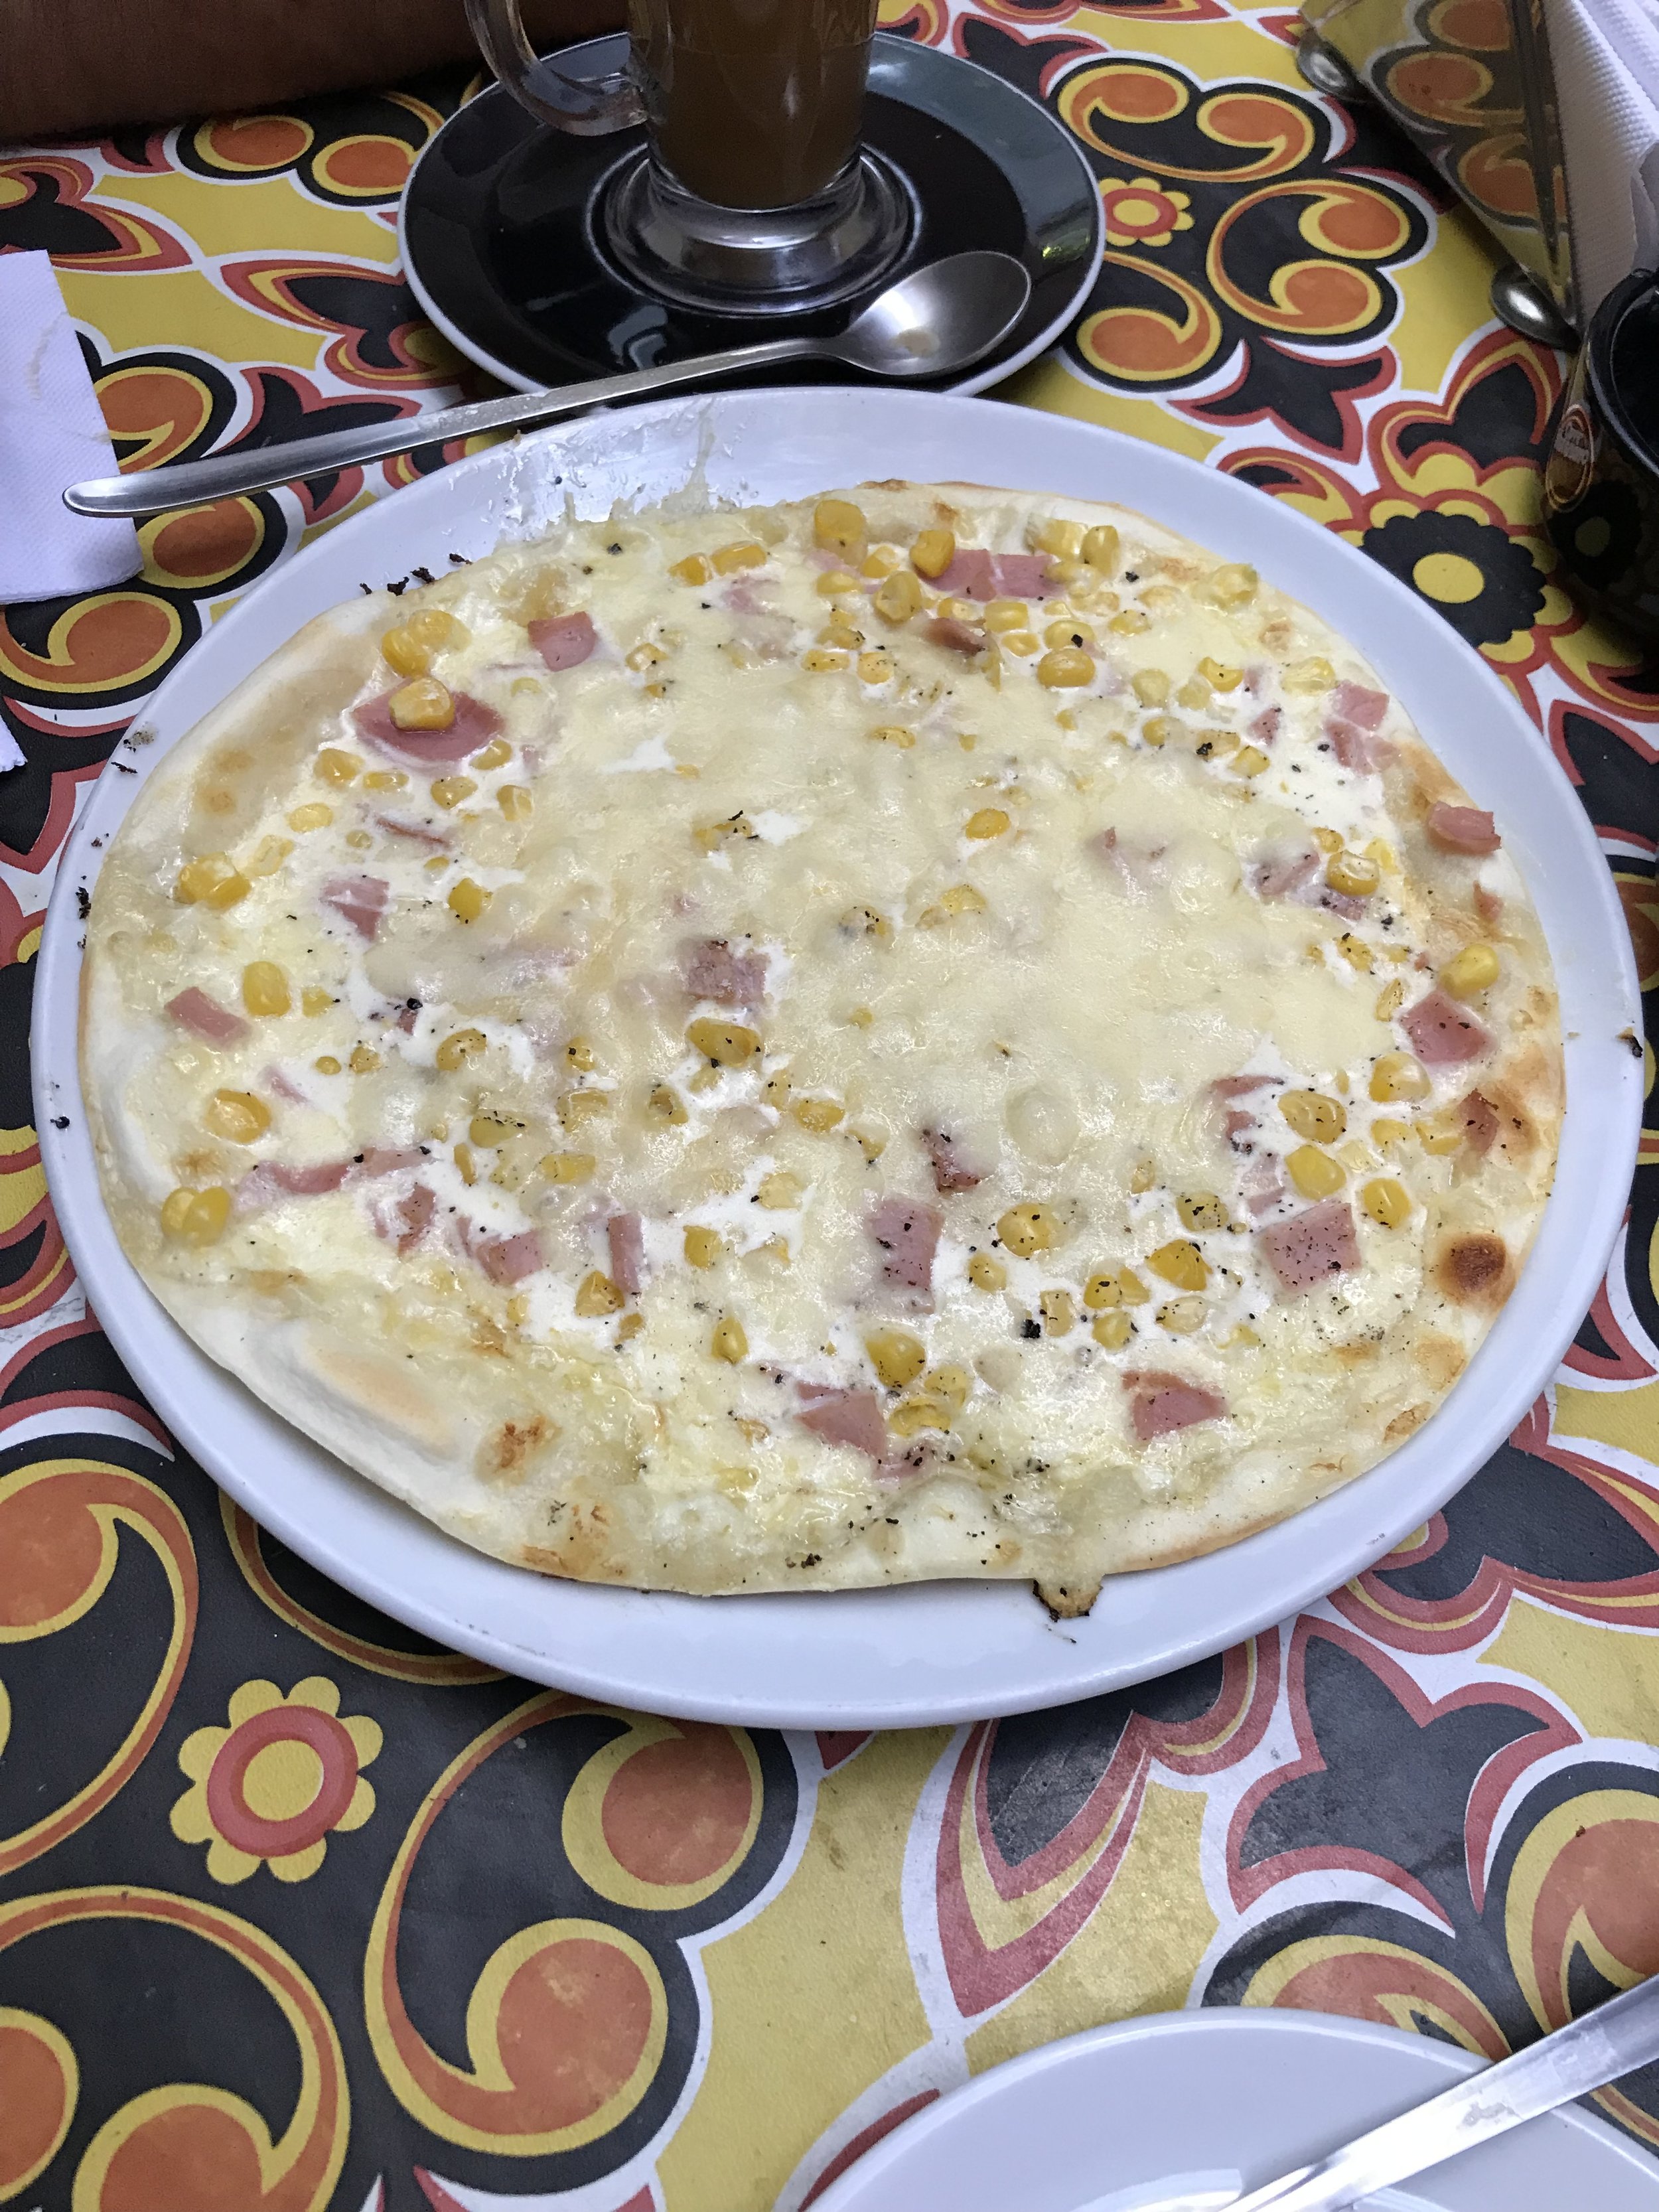 Pizza in Chile